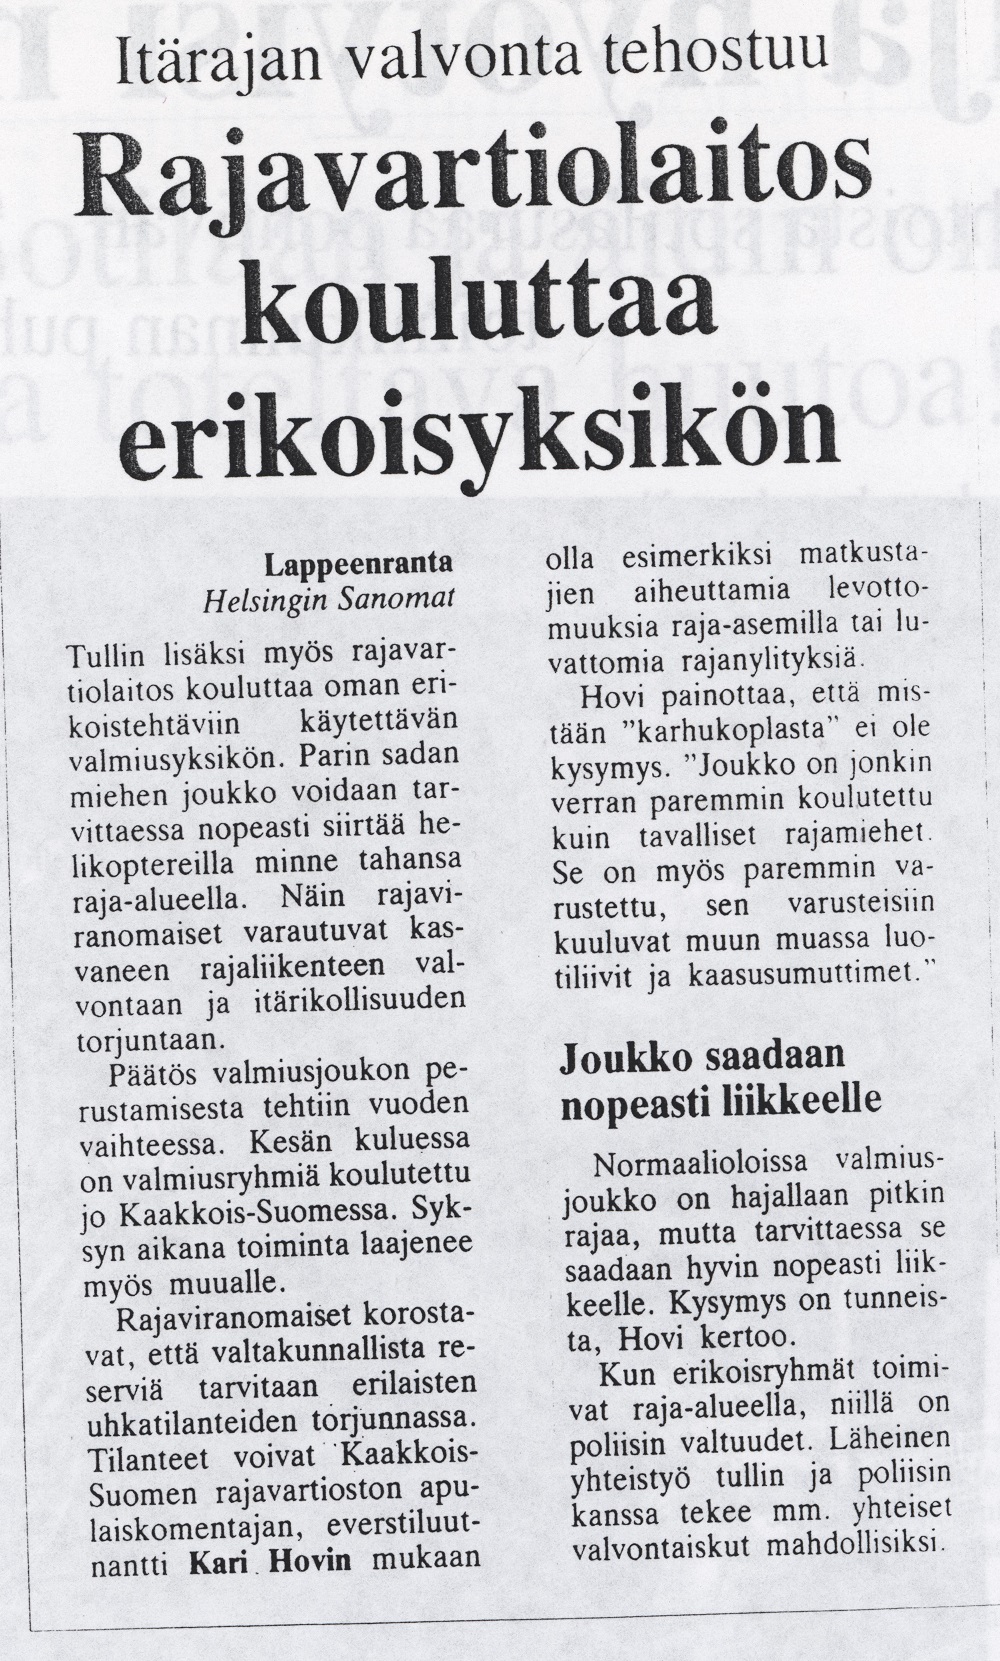 The newspaper clipping announces that the Finnish Border Guard is setting up a rapid deployment force on the eastern border.